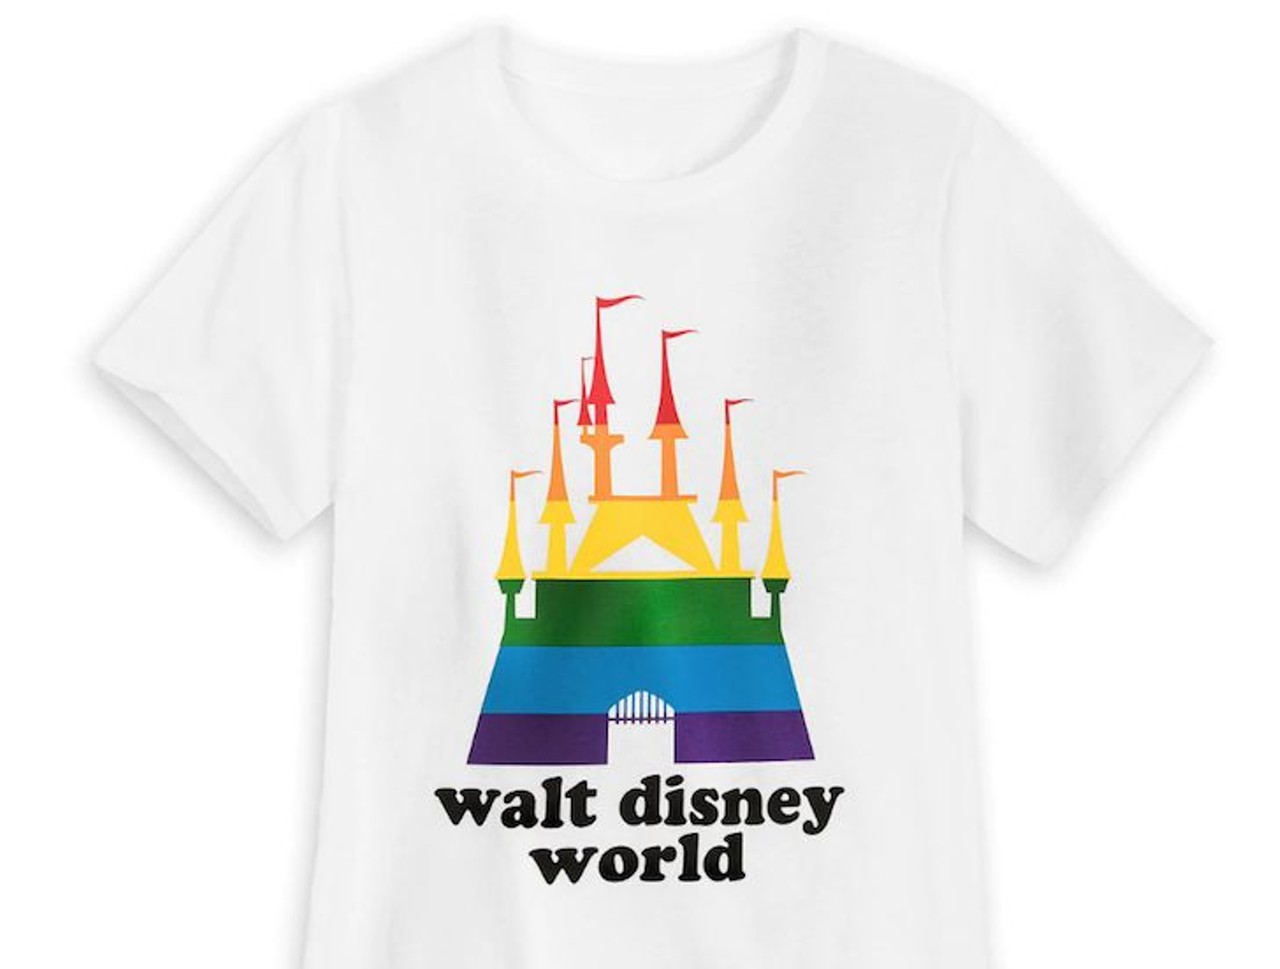 Fantasyland Castle T-shirt
For $29.99 this cotton ribbed scoopneck is soft and lightweight, perfect for staying comfortable at the parks. A screen of the Cinderella castle with rainbow fill and the slogan &#147;Walt Disney World&#148; complete the T-shirt.
Photo via shopDisney